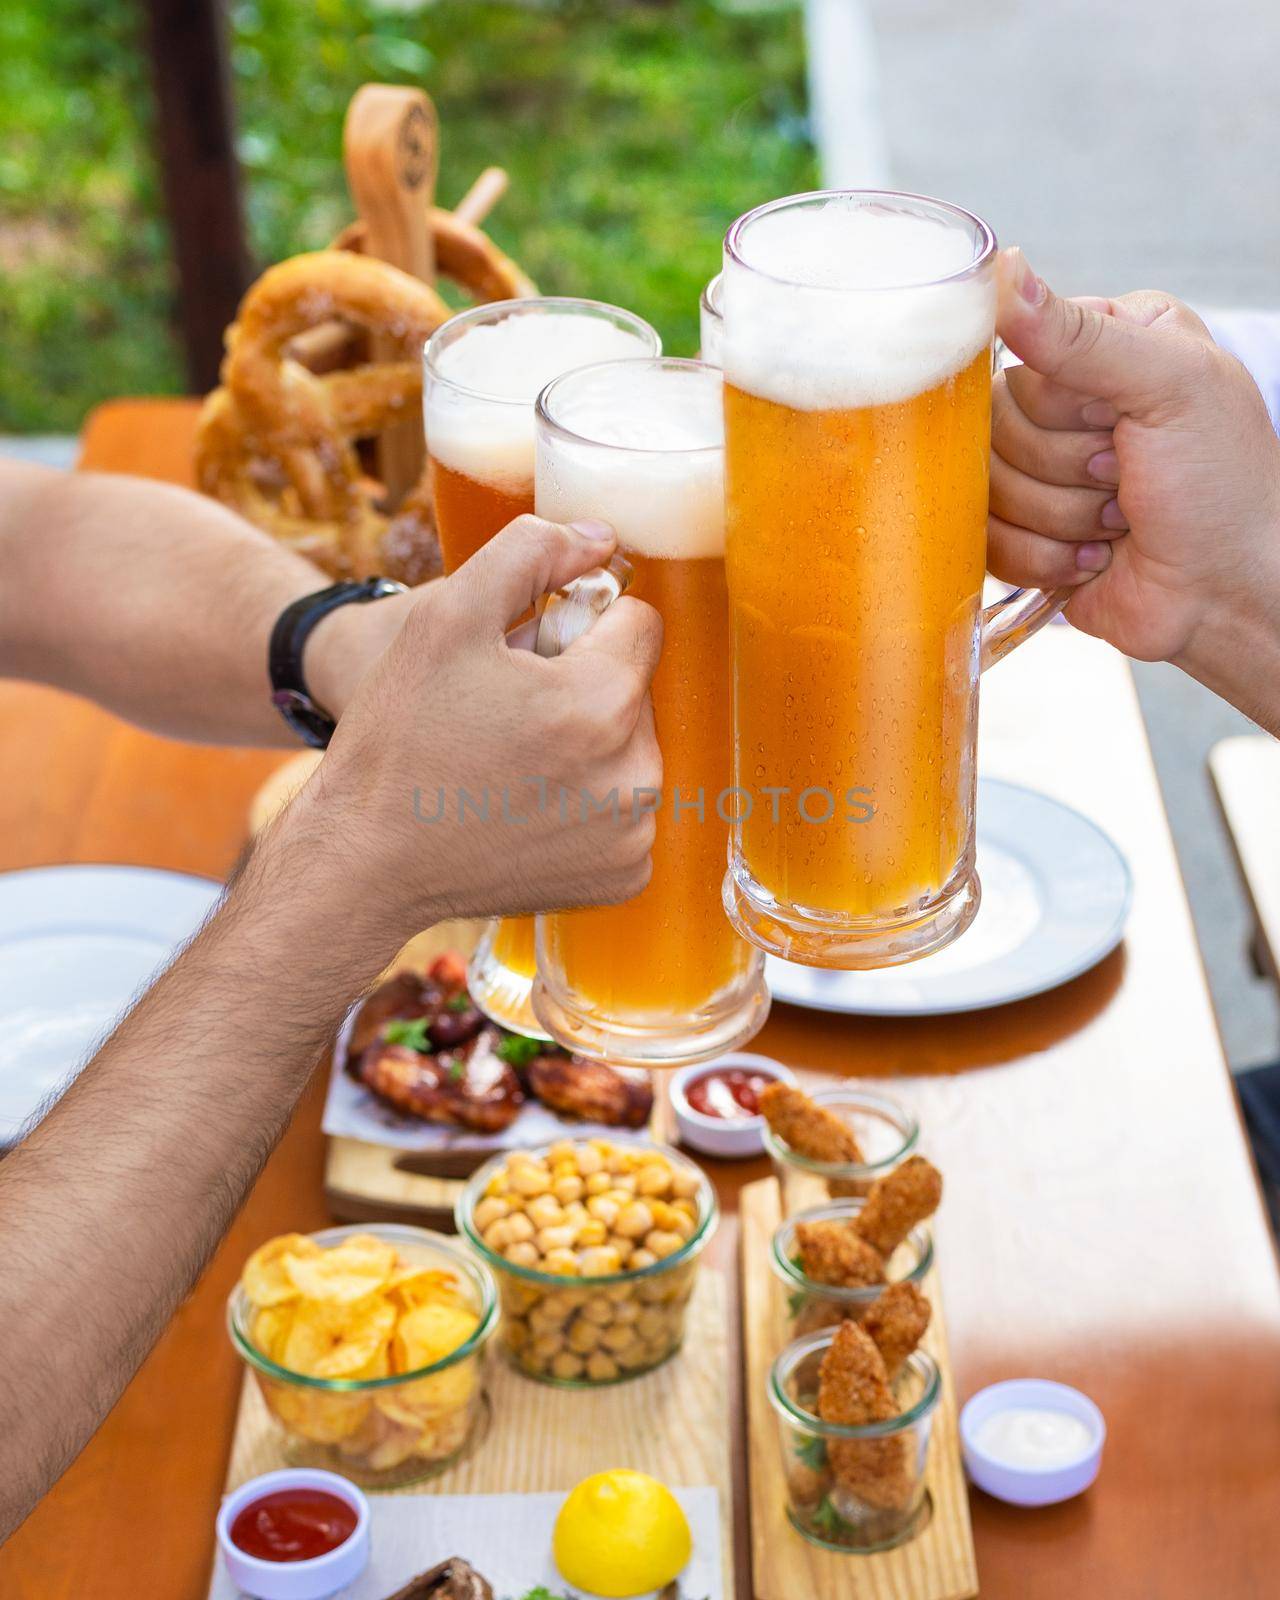 Clinking beer mugs outside, snacks on the table by ferhad